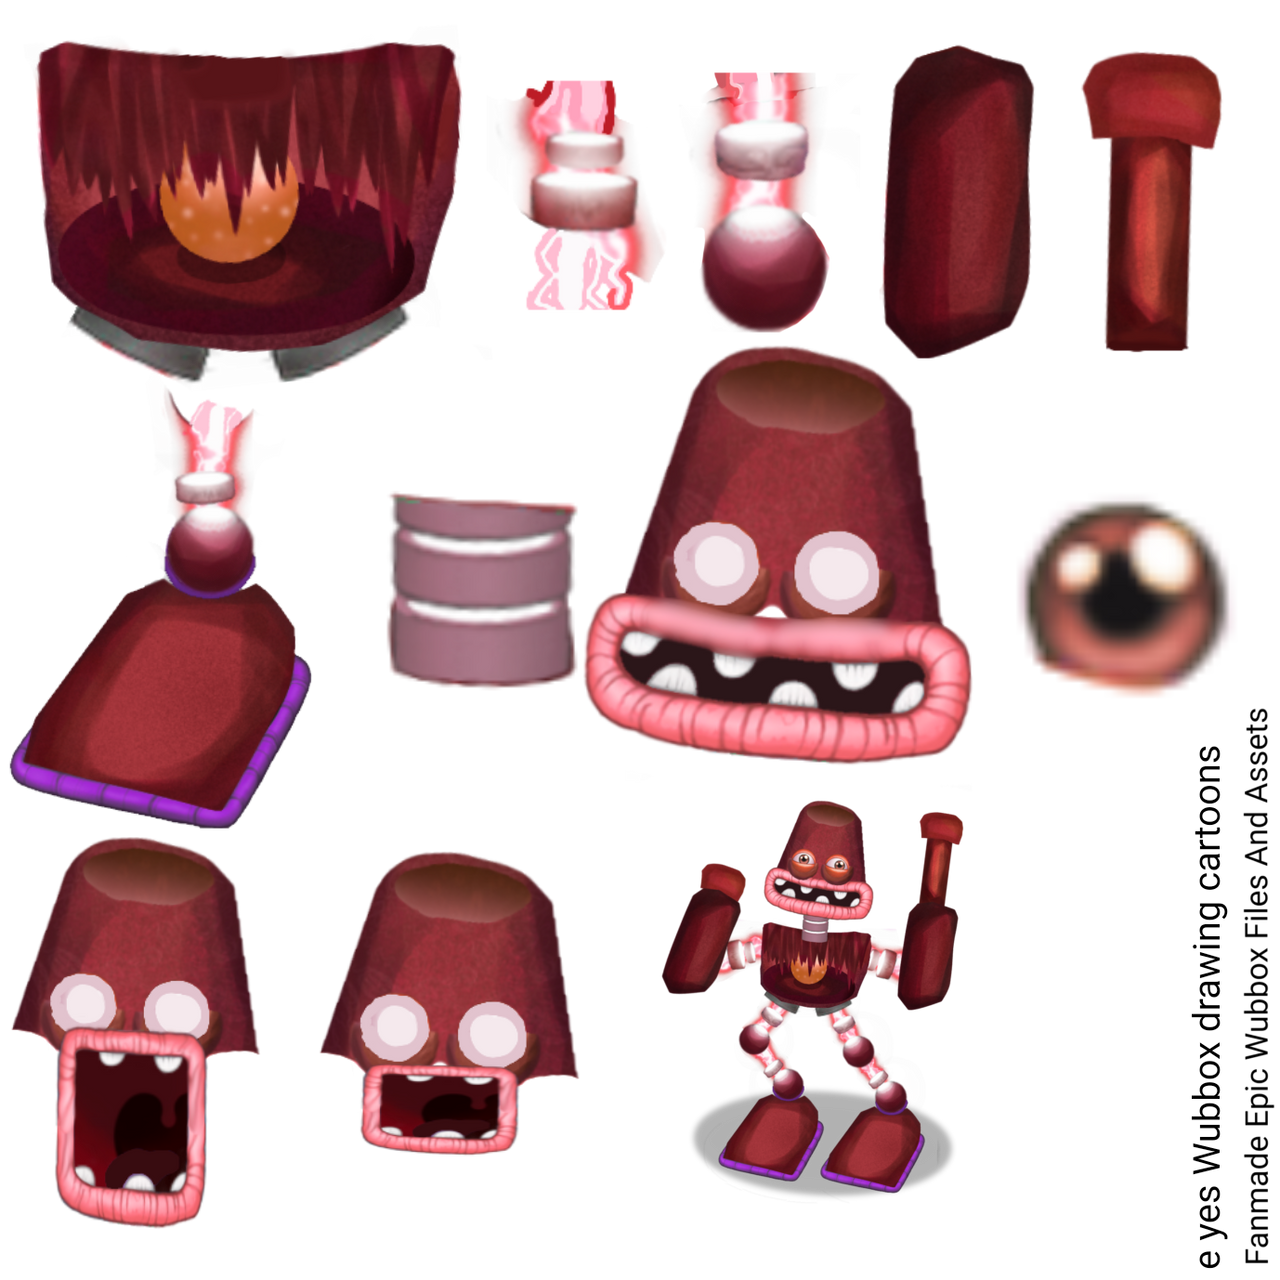 Fanmade Epic Wubbox Files And Assets e yes 2 by le9019198 on DeviantArt